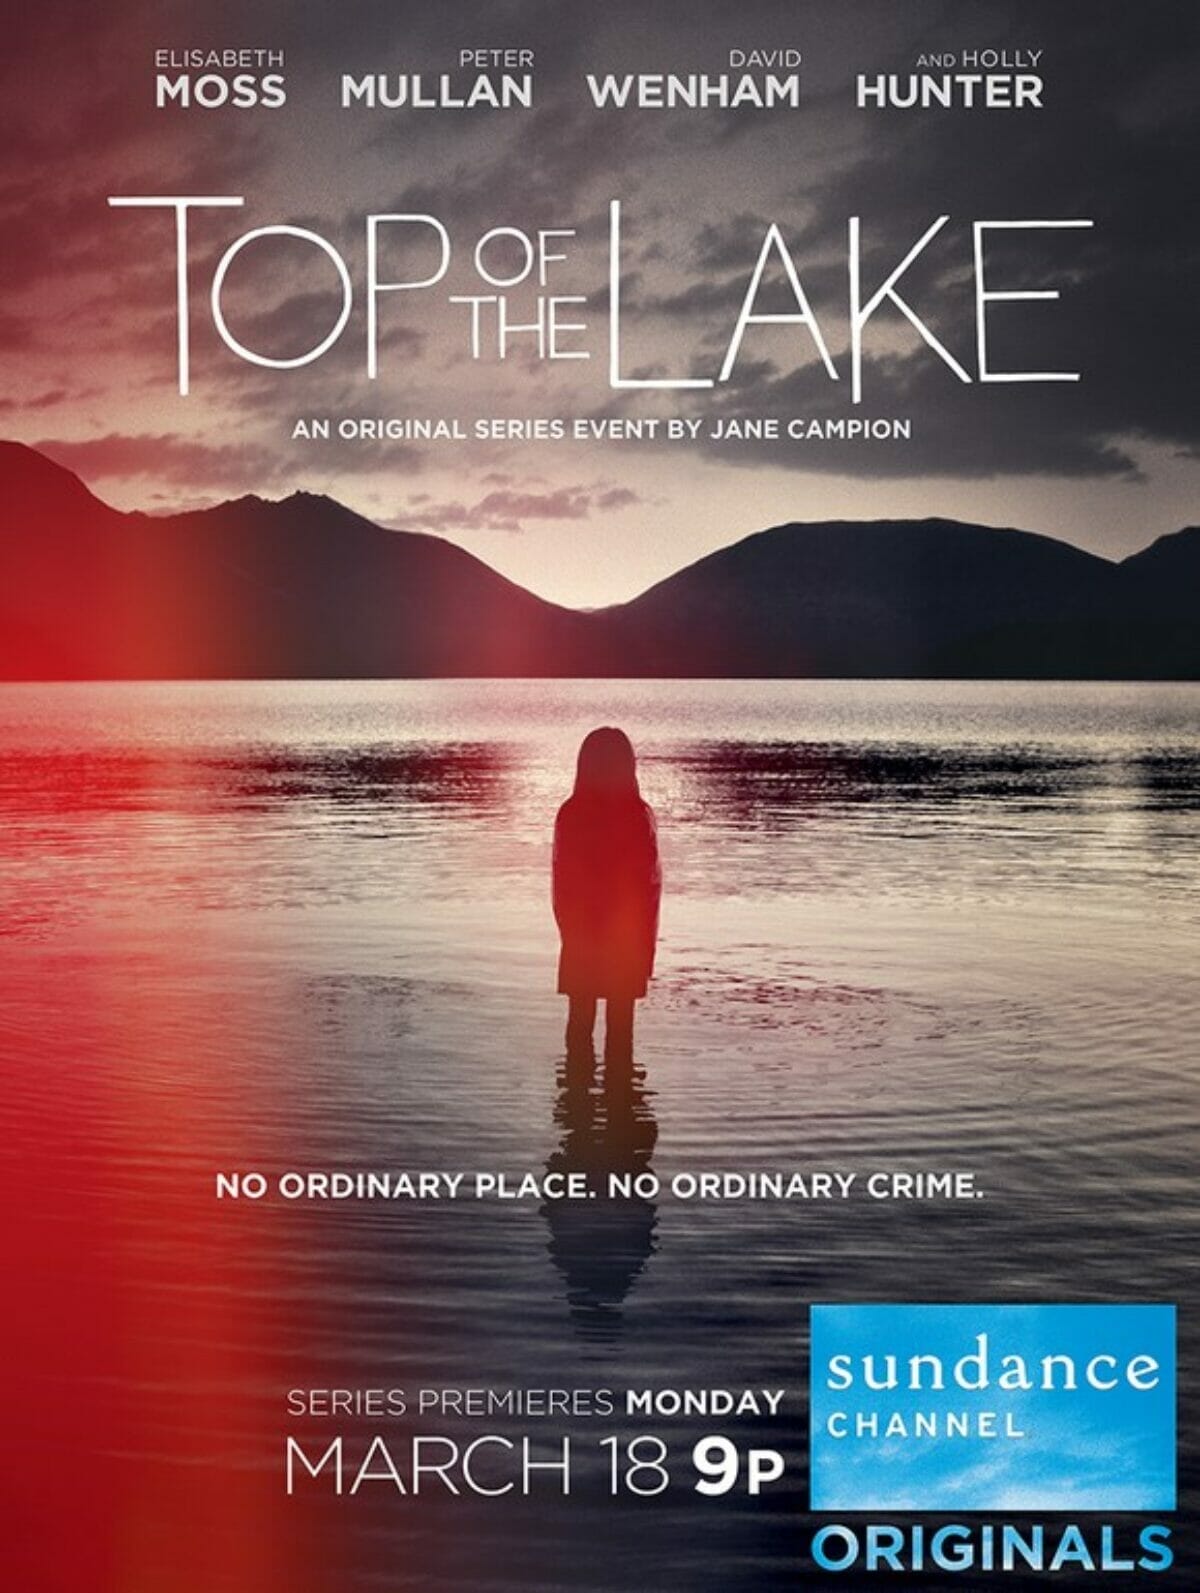 Top-of-the-lake